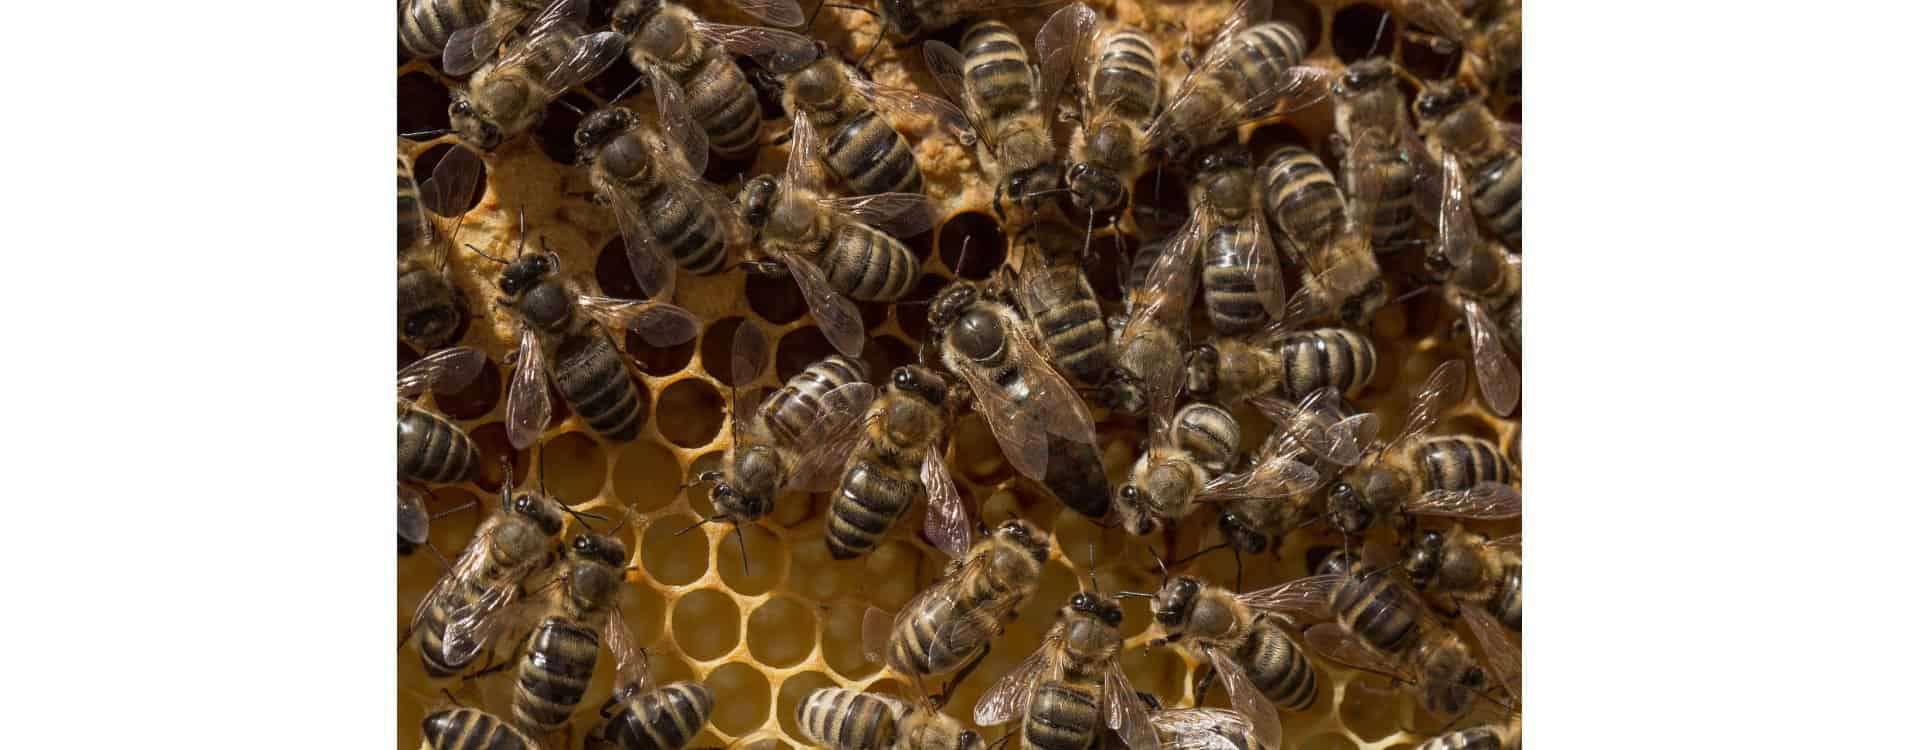 The Queen Bee Egg Laying Process